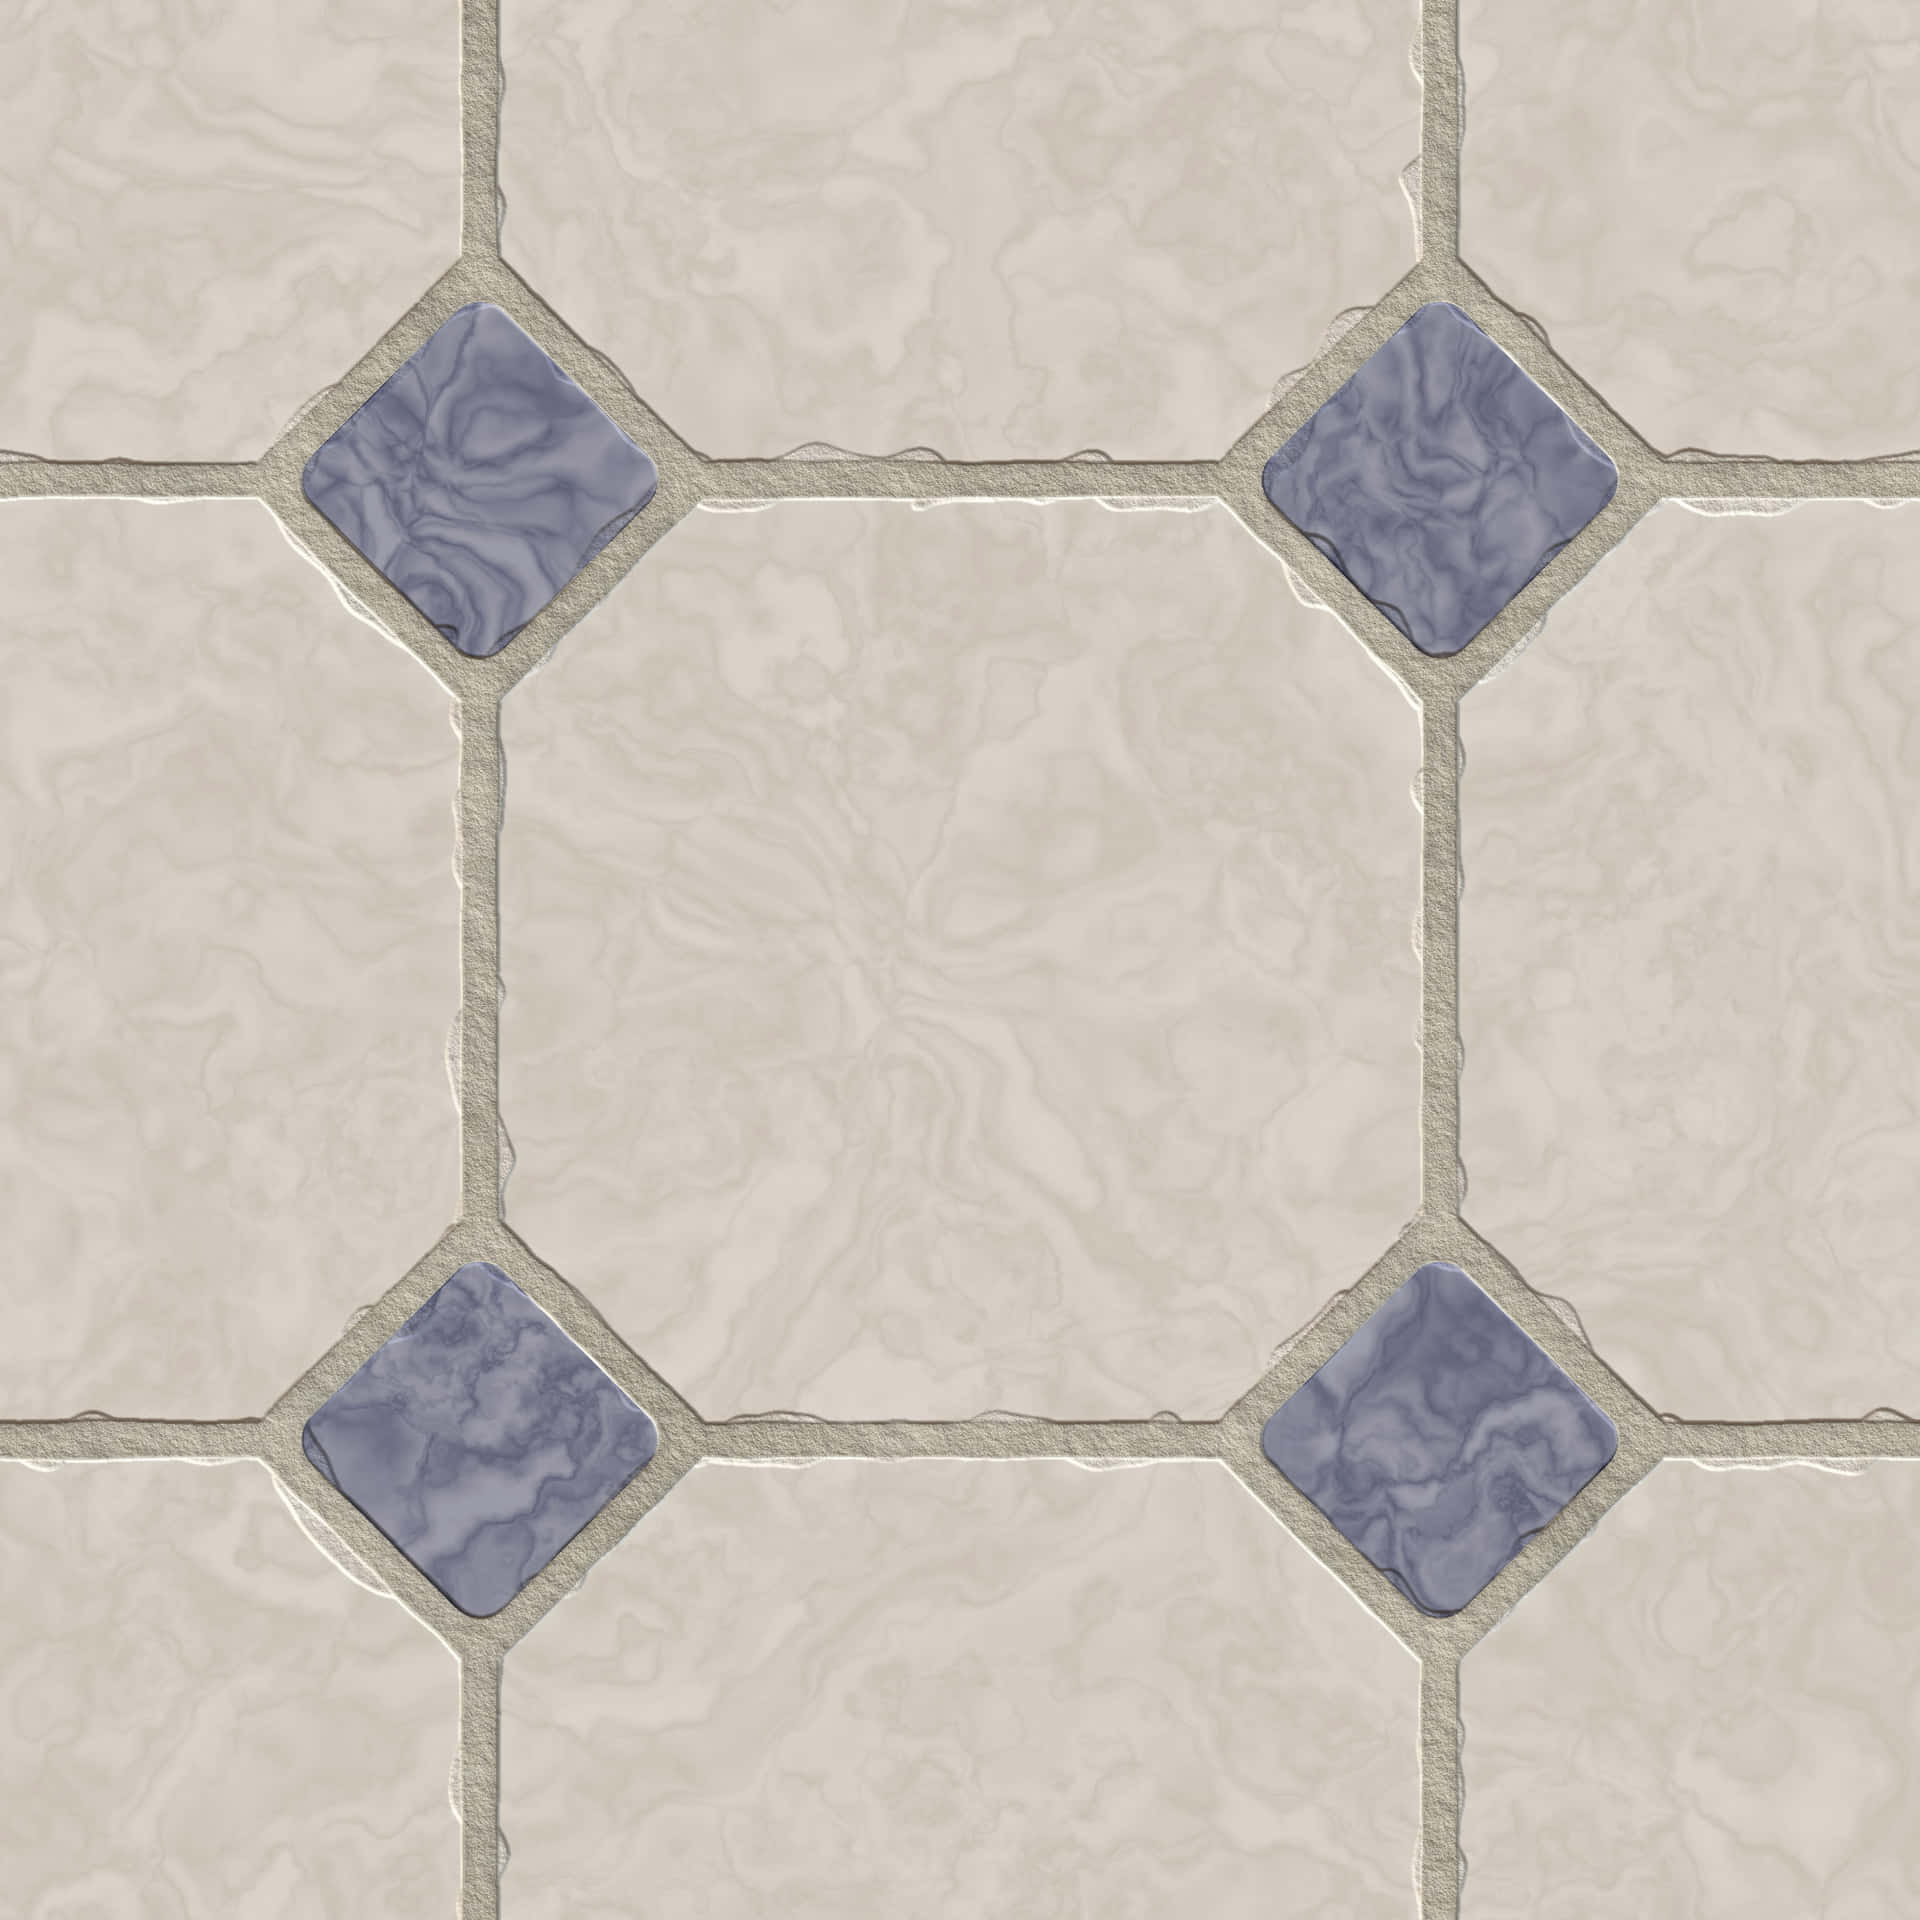 Tile Floor With Blue And White Tiles Background